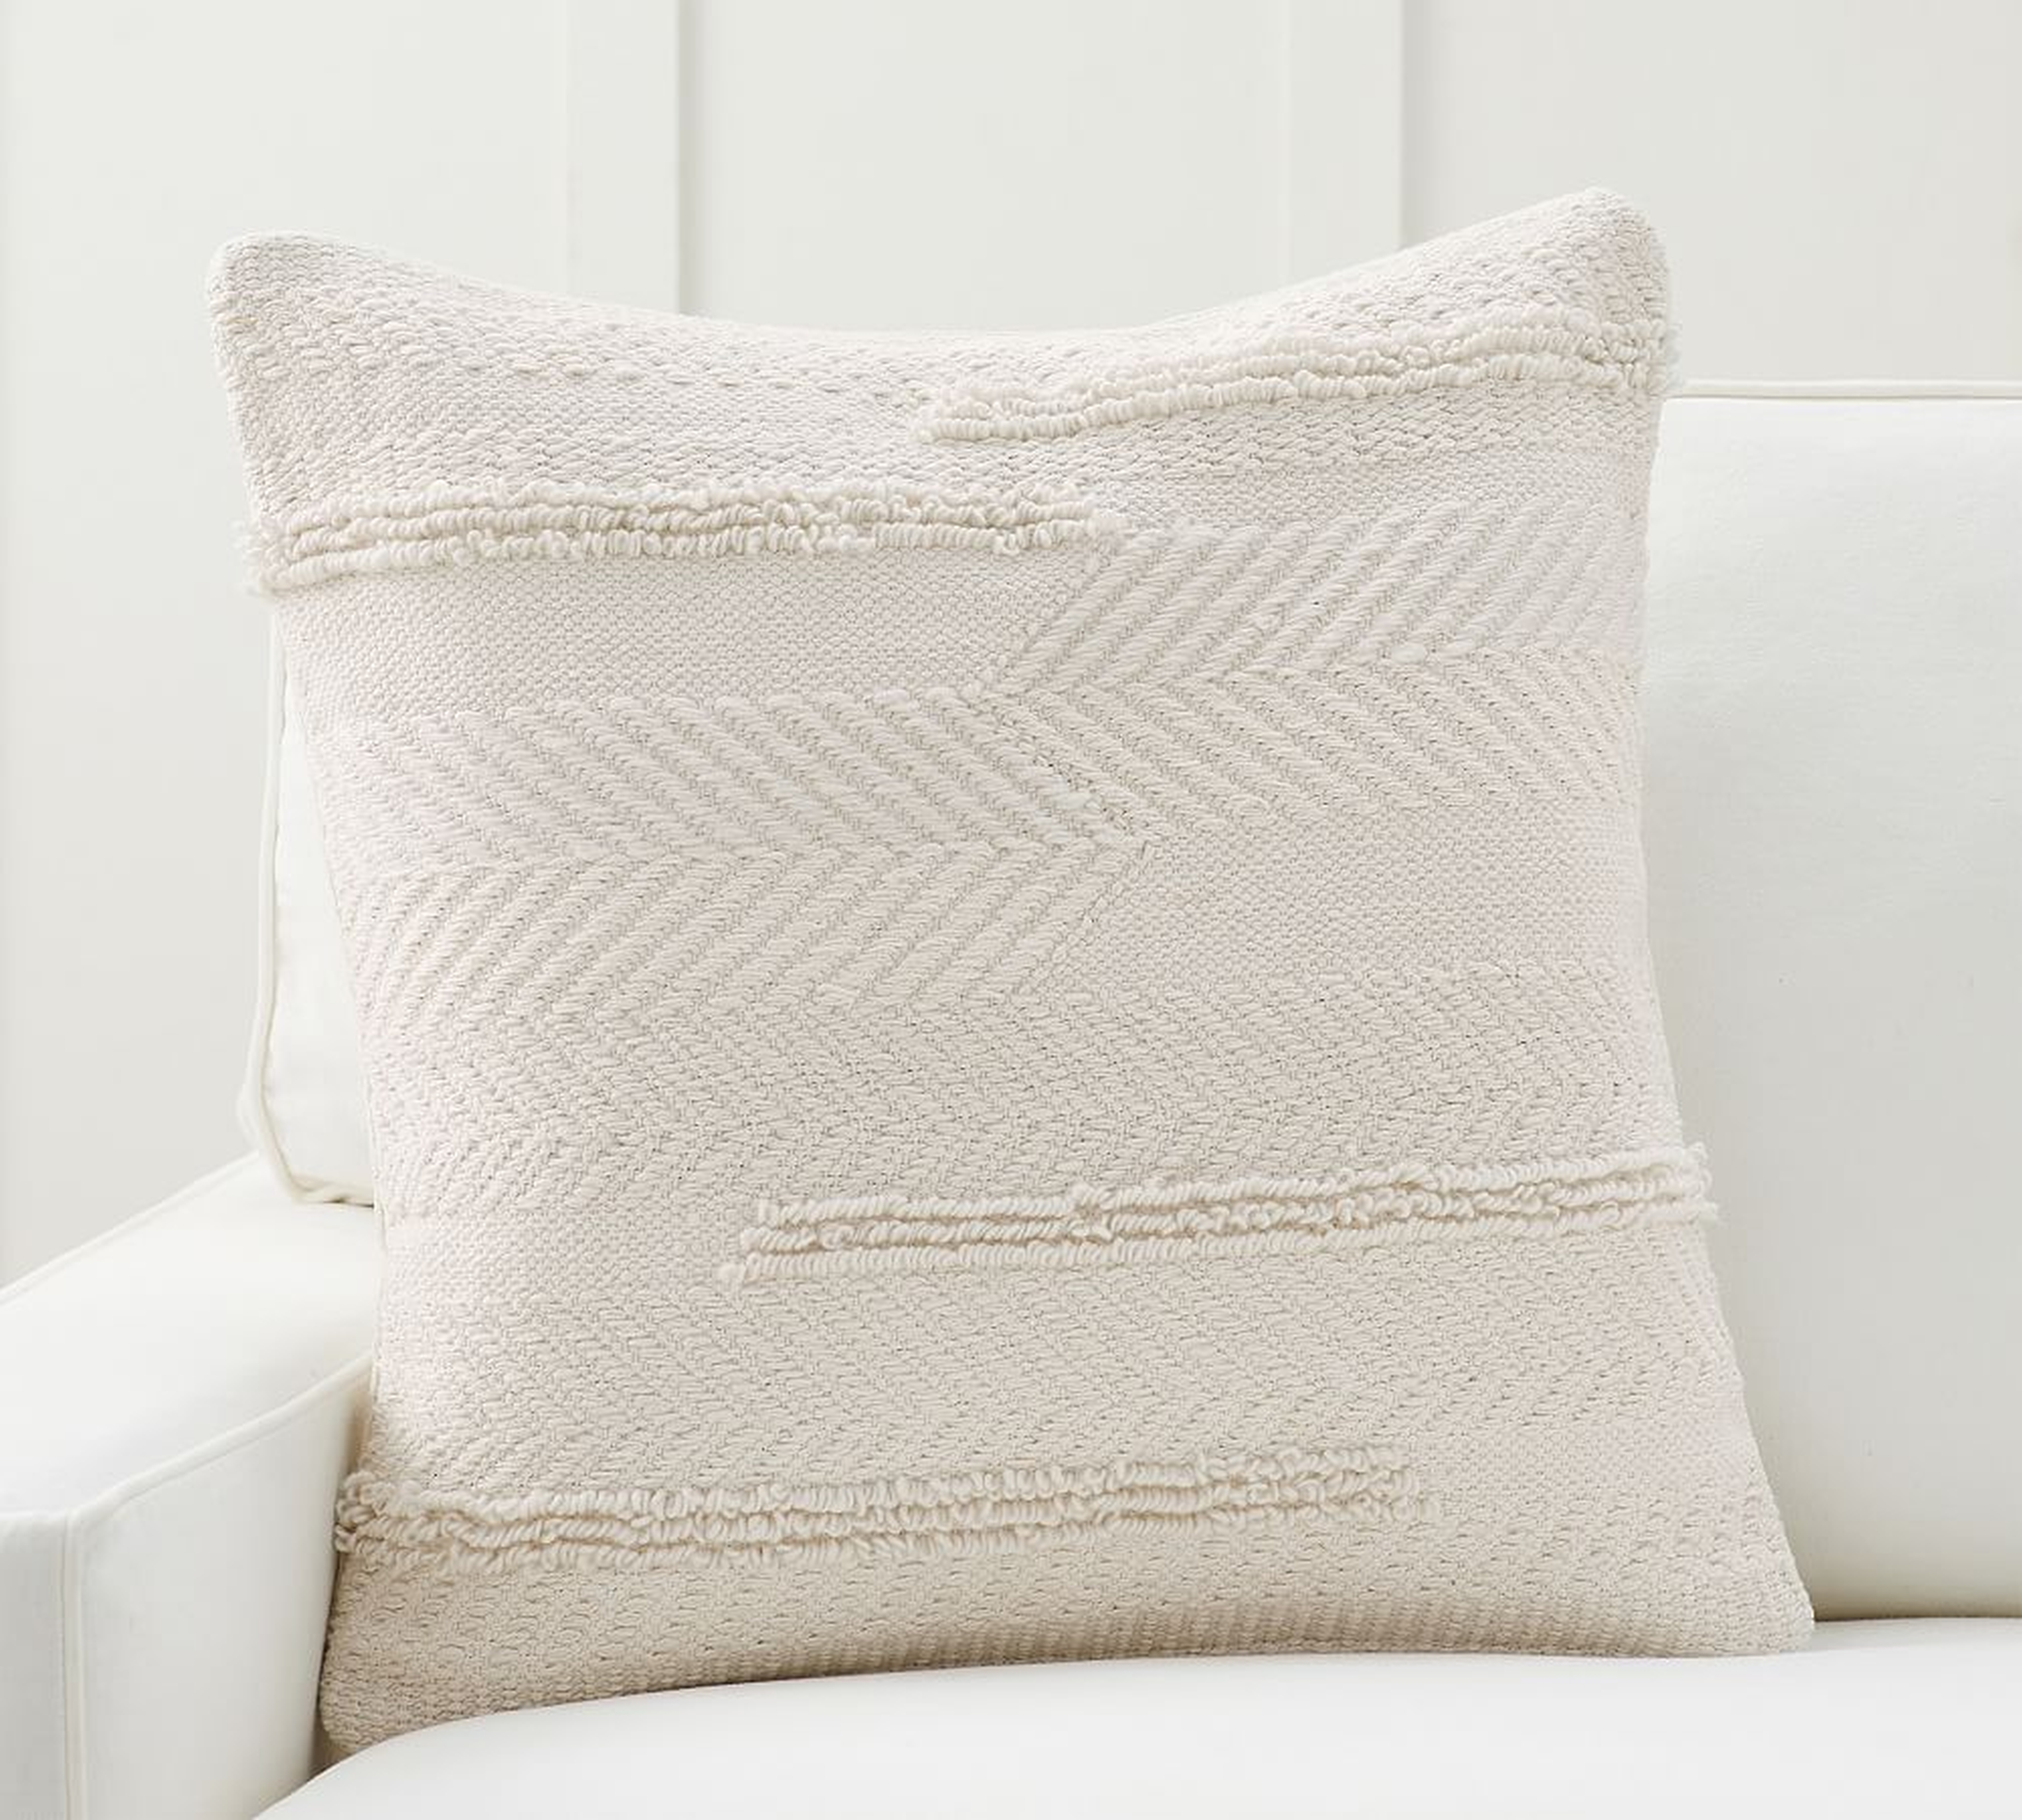 Lyla Textured Pillow Cover, 24", Ivory - Pottery Barn